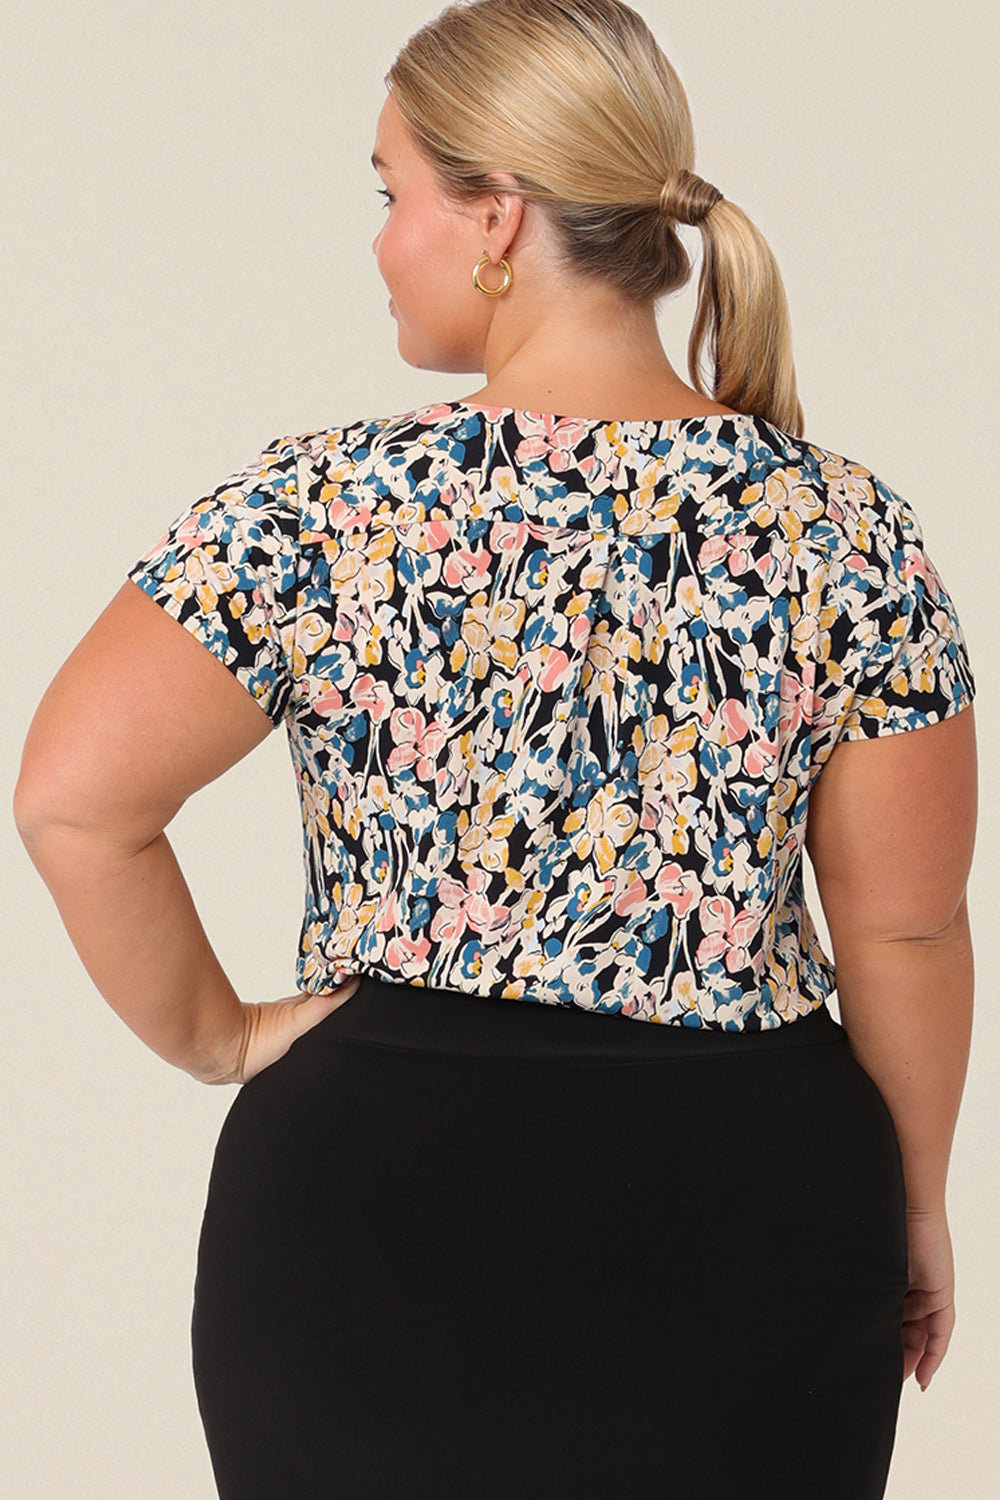 Back view of a petite height, size 14 woman wearing a casual jersey top. The top has short sleeves, a cowl neckline and is printed with a floral pattern for a casual weekend look.